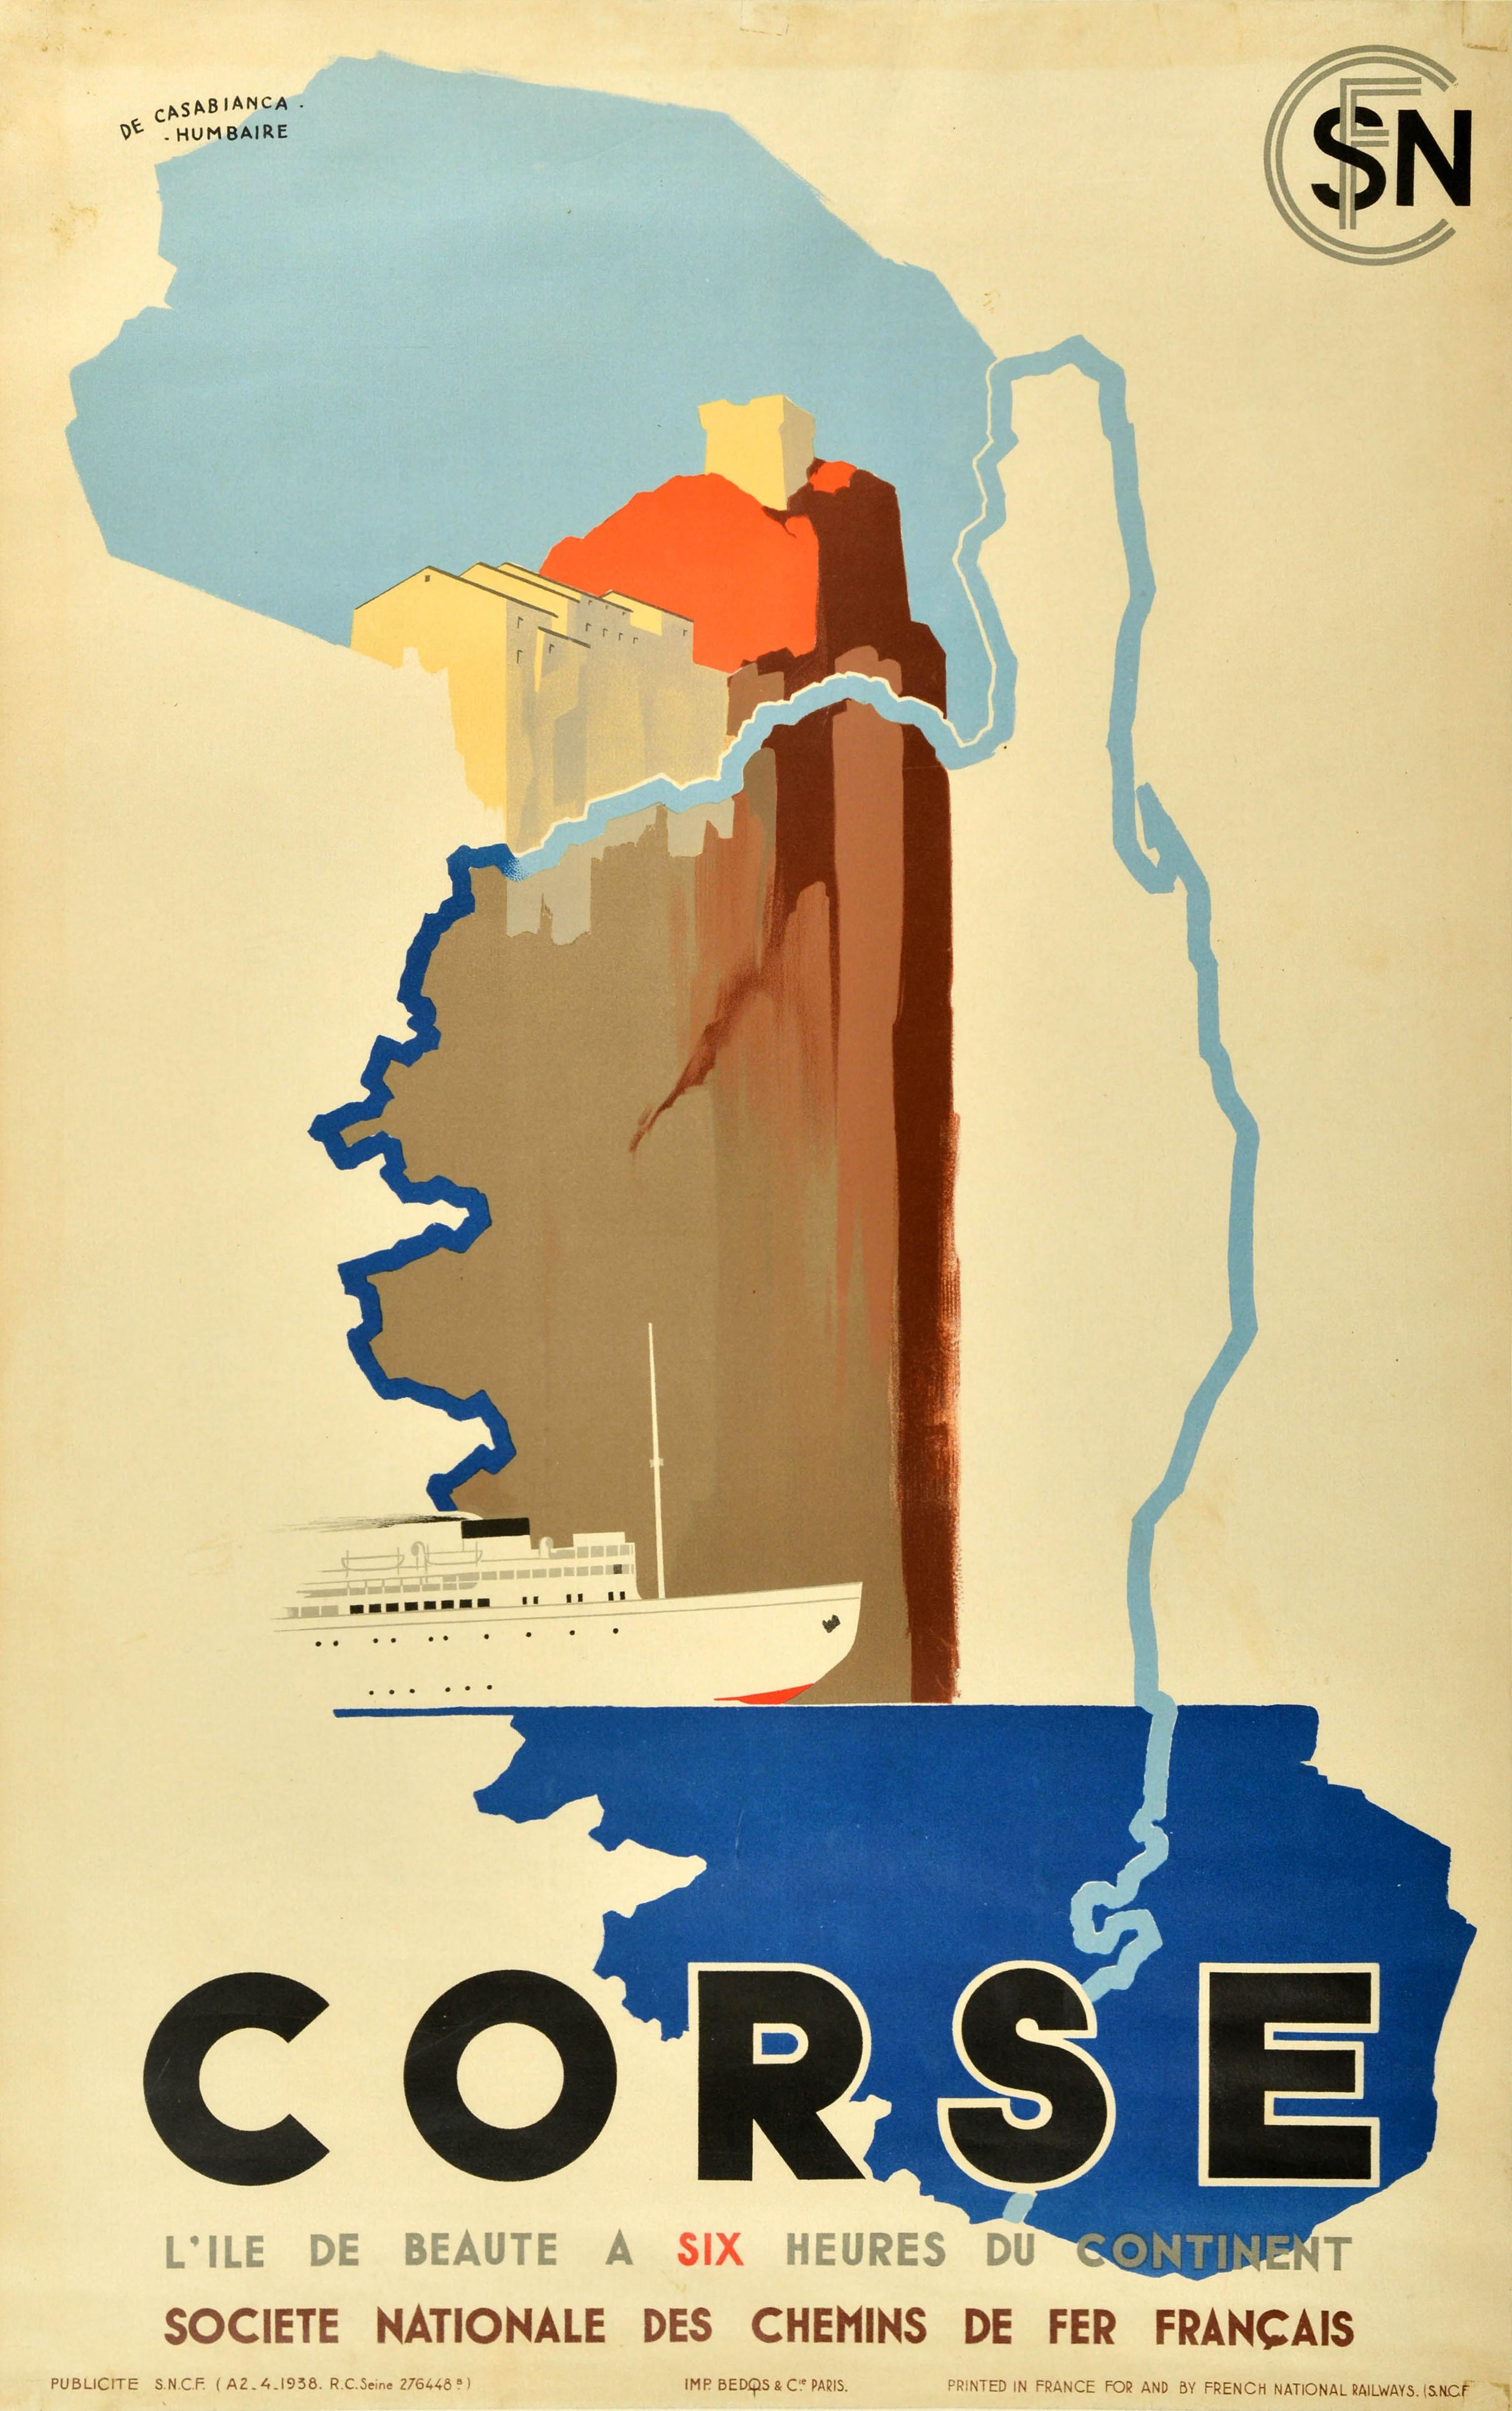 Unknown Print - Original Vintage Train Travel Poster Corsica Corse SNCF French National Railways